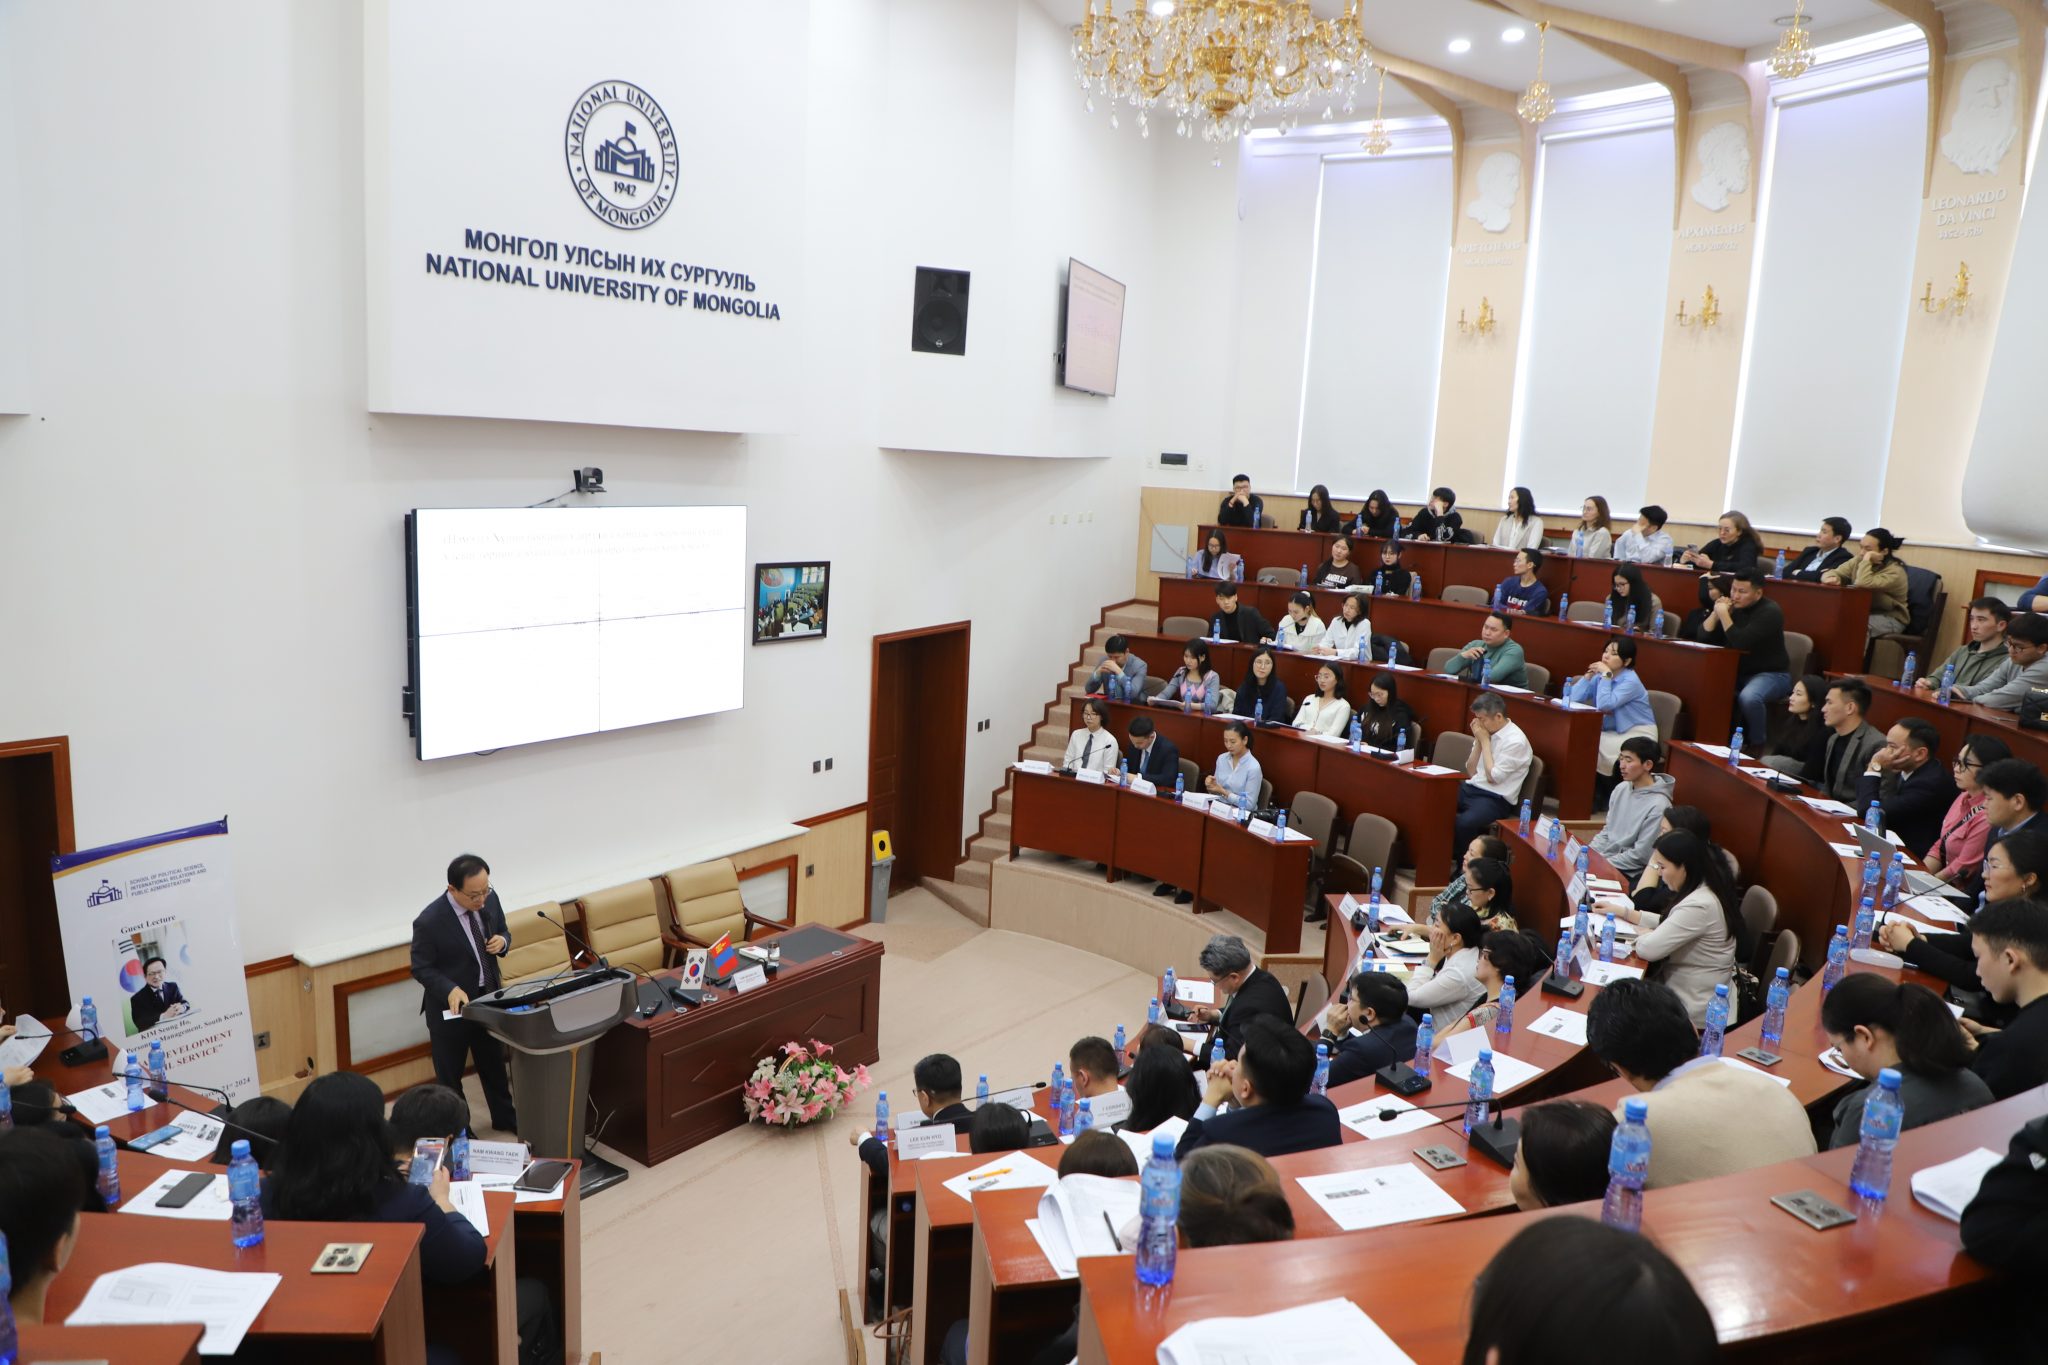 The Minister of the Personnel Management, the Republic of Korea, gave a guest lecture to graduate and undergraduate students at the School of Political Science, International Relations, and Public Administration, National University of Mongolia